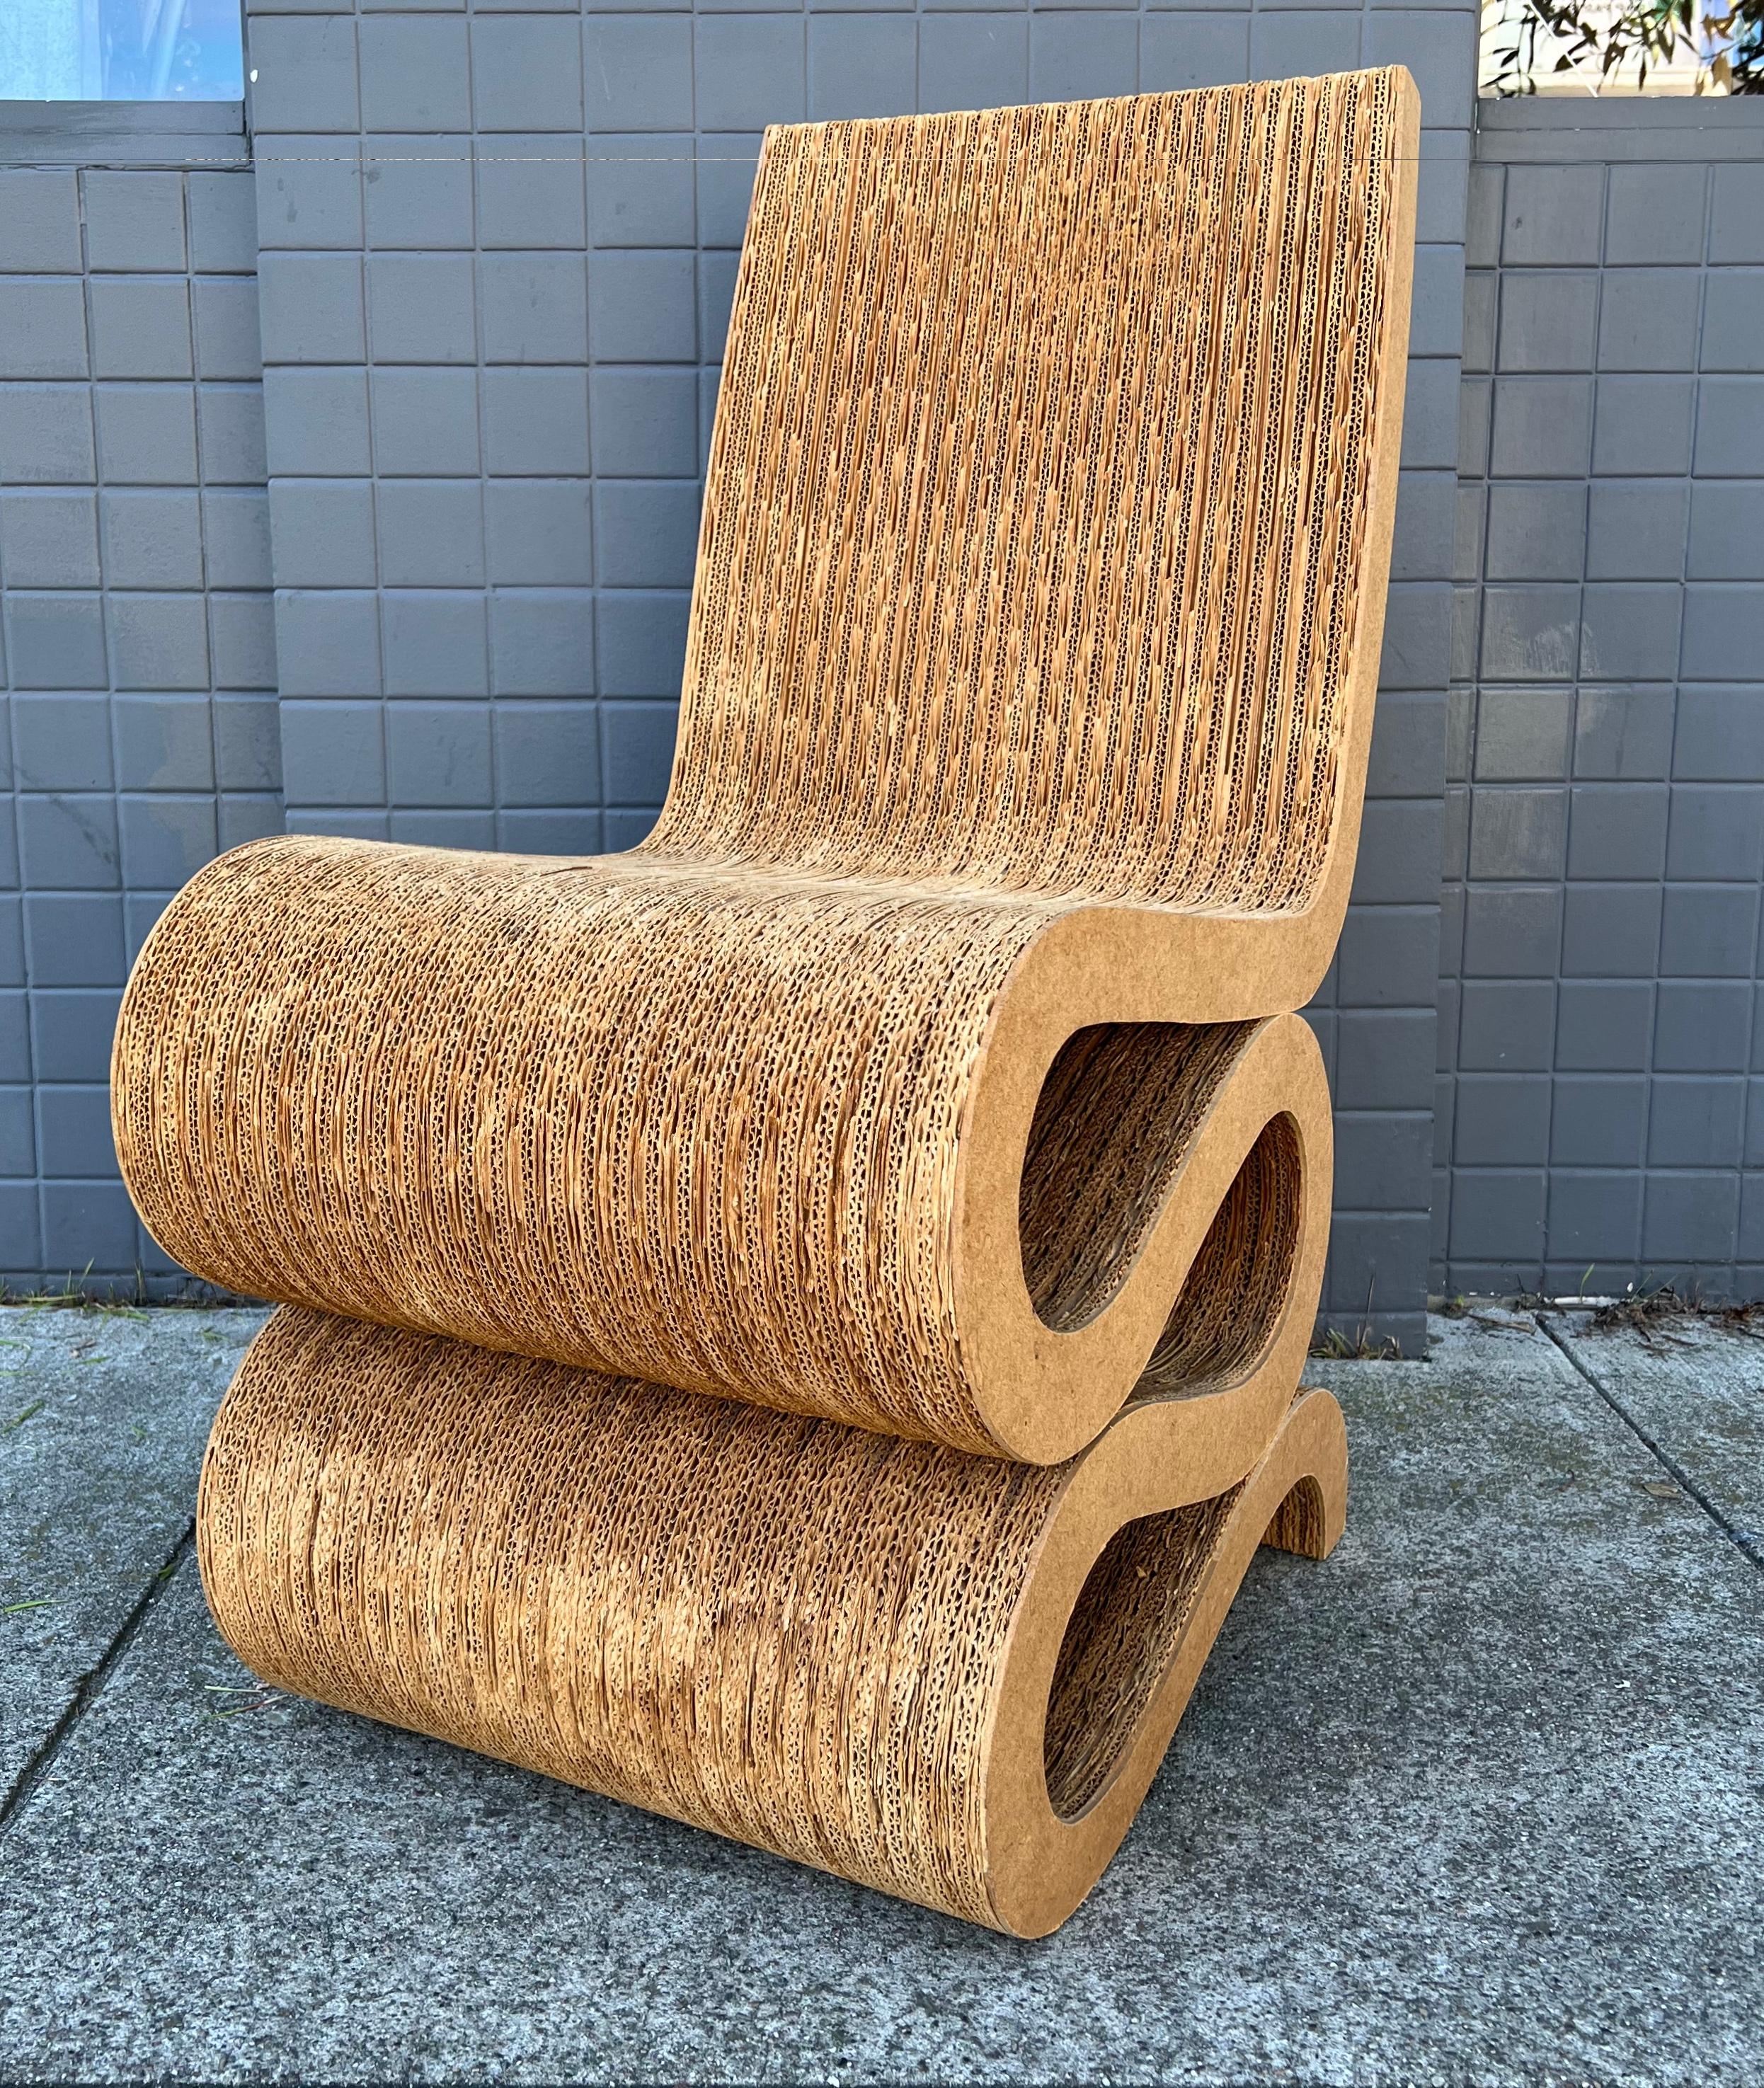 Rare early 1970s Wiggle side chair by Frank O. Gehry from his innovative and iconic Easy Edges collection of cardboard furniture.

Conceived in 1969 and launched in 1972 to critical and popular acclaim, the original production run of the Wiggle